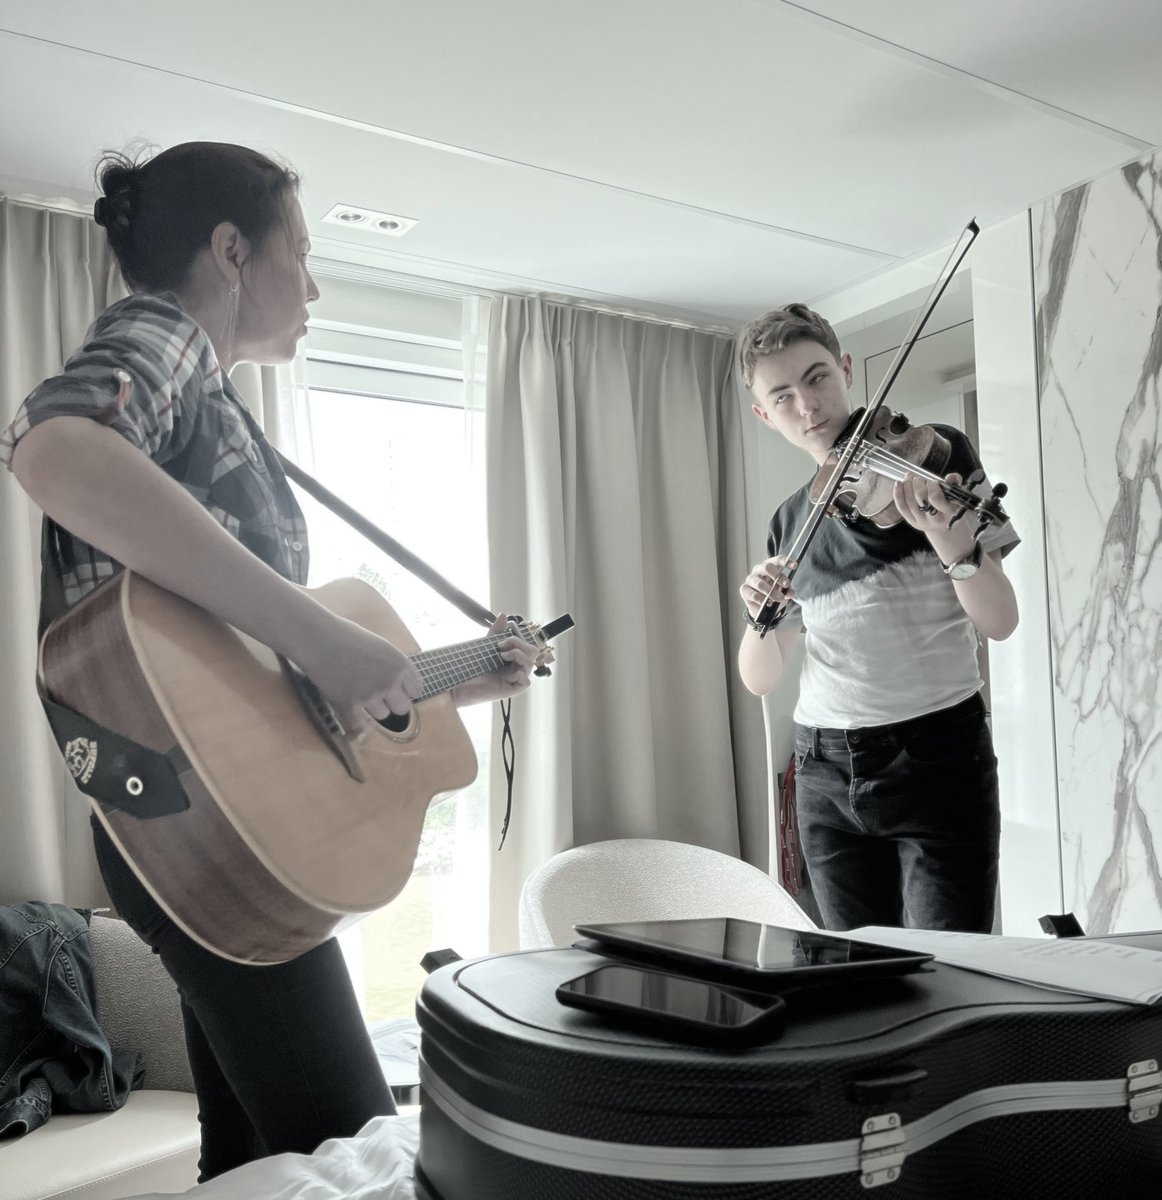 In 2 weeks, I'll be preparing to play on a ship somewhere between Amsterdam & Rotterdam. I can't wait! These are unlike any gig you've been to. It's a privilege to play again. Check out @harmonyvoyages Here's me warming up with the eldest the last time I played on a ship.